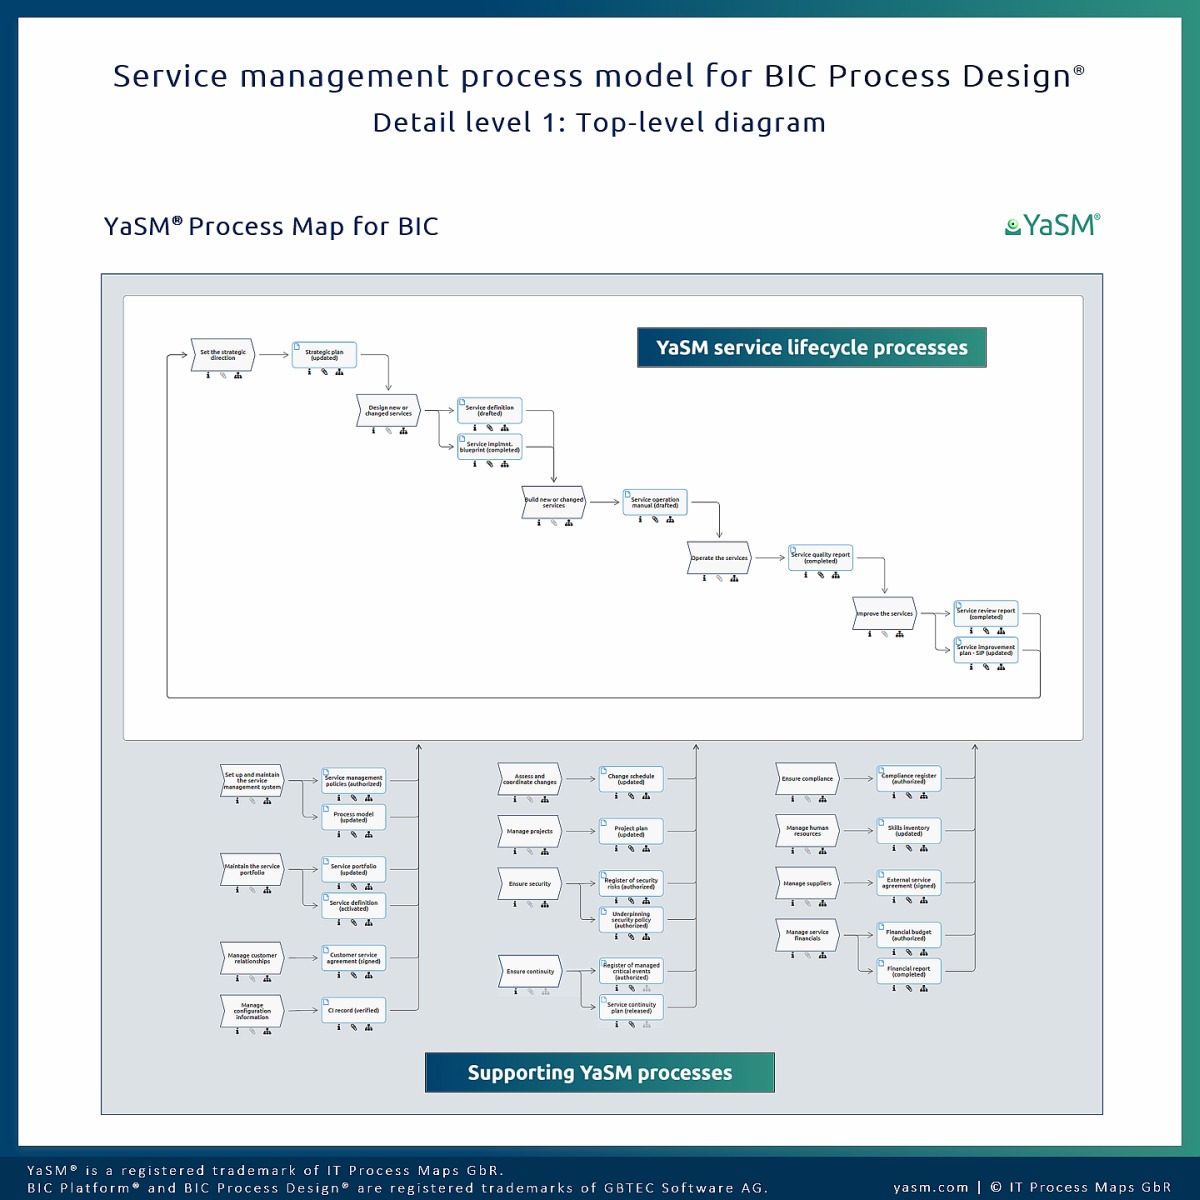 The top-level diagram of the YaSM Process Map for BIC (BIC Process Design) presents an overview of all service management processes.